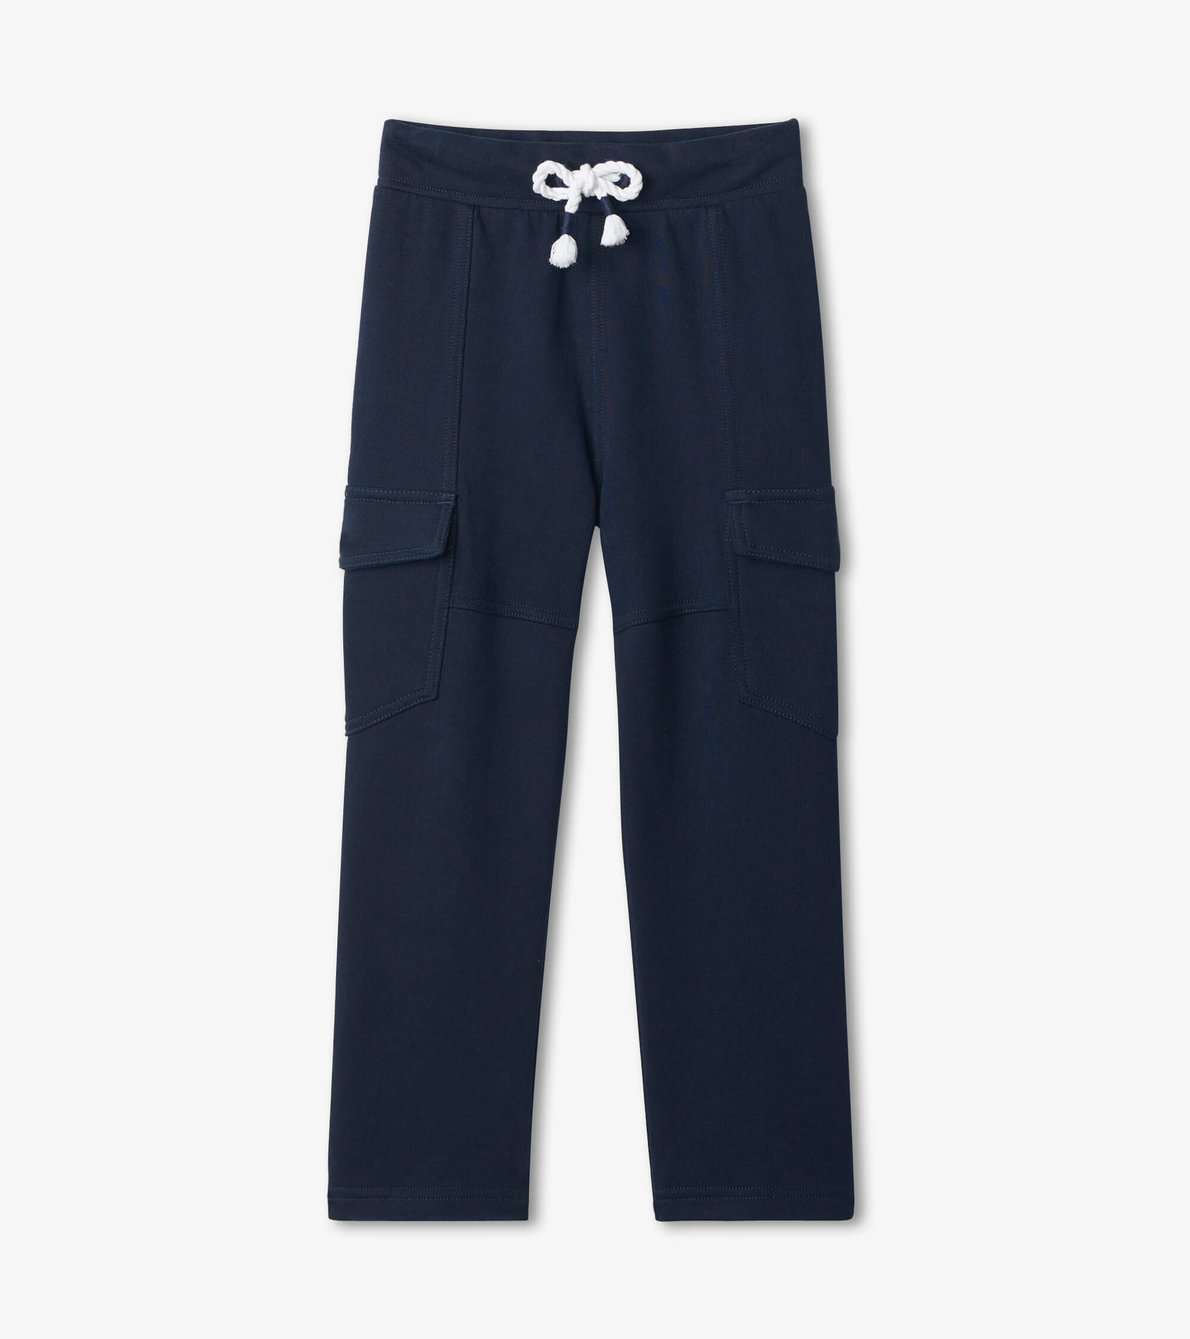 View larger image of Navy Blue Cargo Joggers